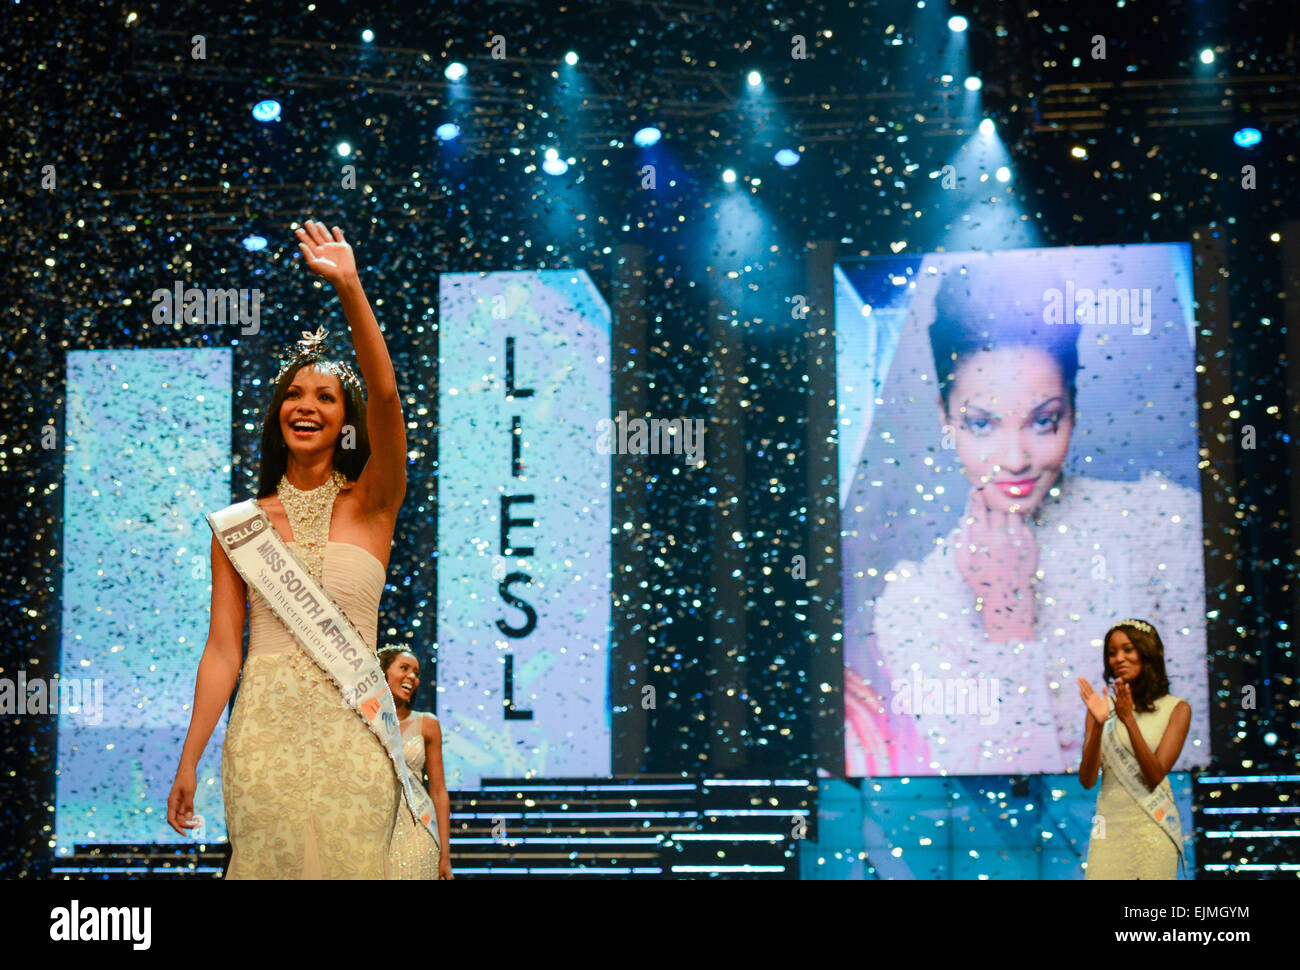 Sun City South Africa 29th Mar 2015 The First Prize Winner Liesl Laurie Waves To The Spectators During The Miss South Africa 2015 Pageant And Celebration In Sun City South Africa On